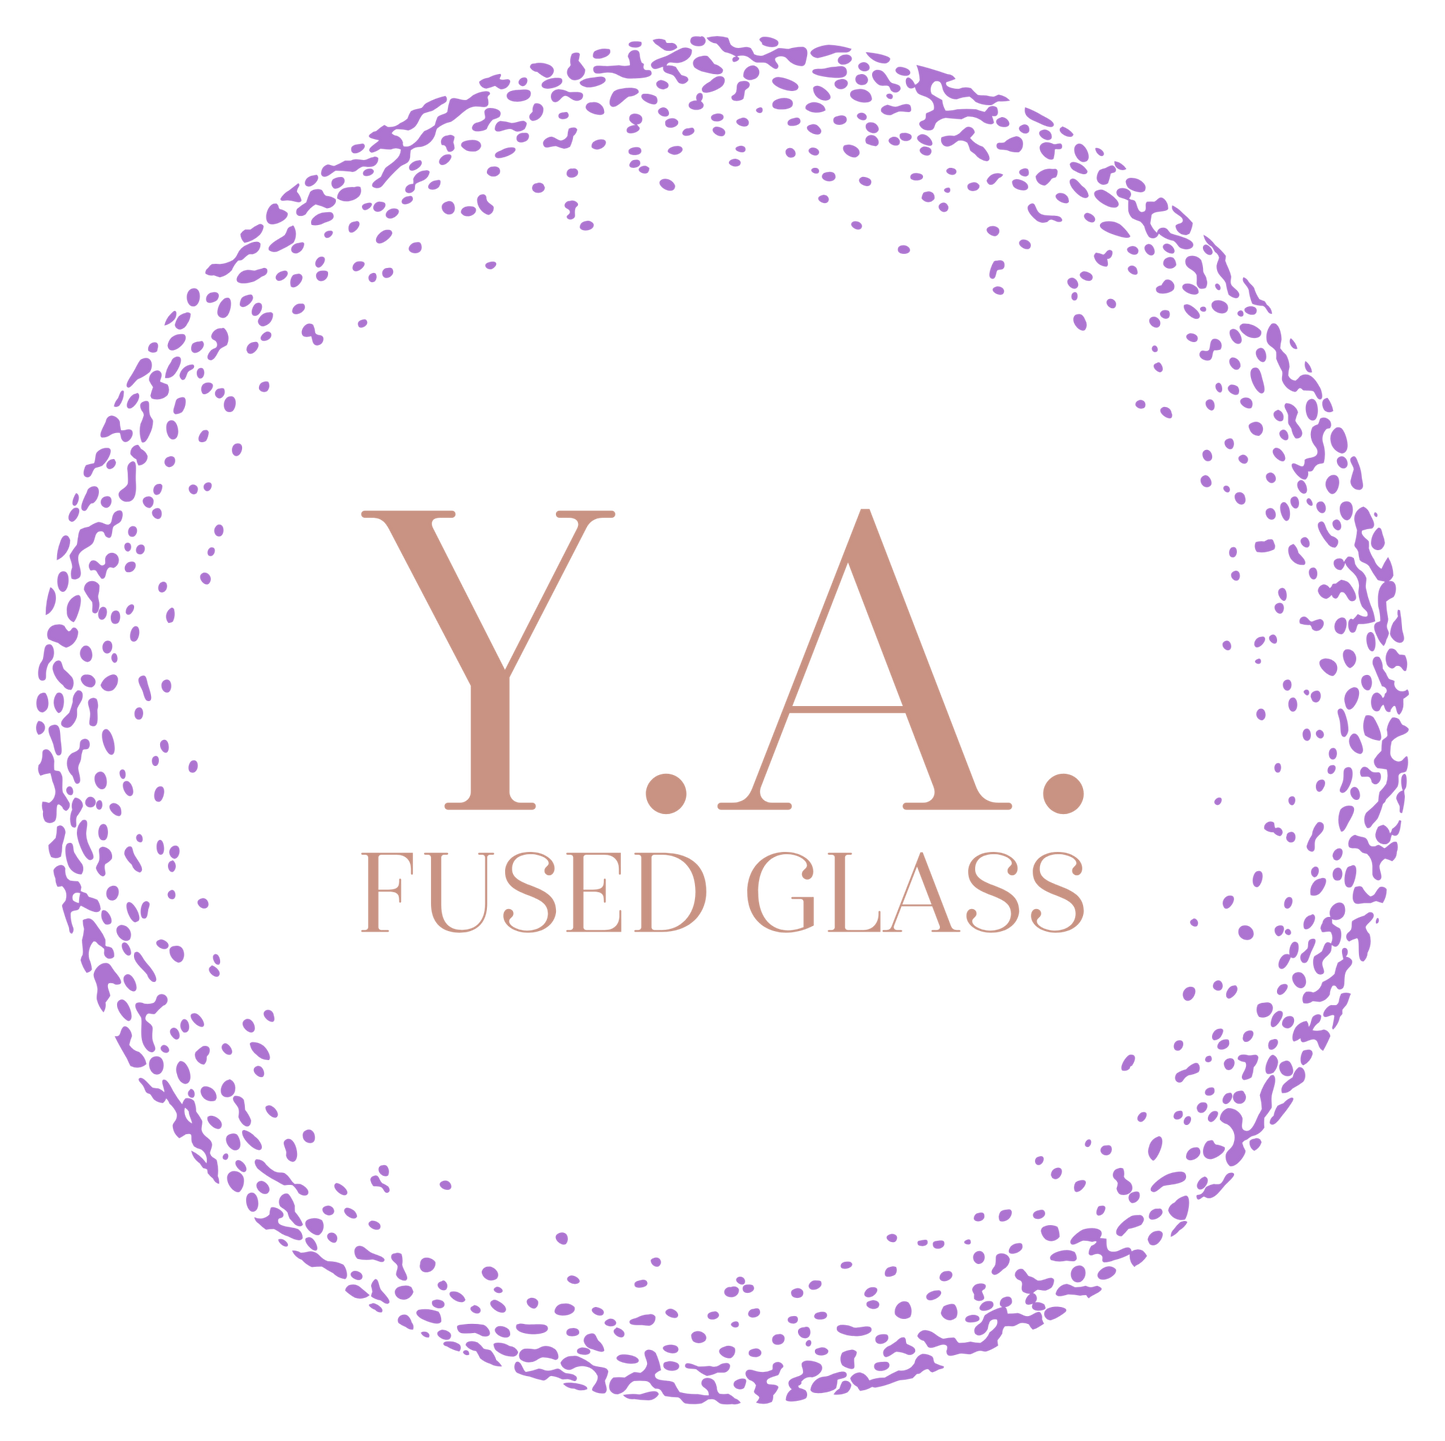 Y.A. Fused Glass E-Gift Card - Y.A. Fused Glass - Gift Cards